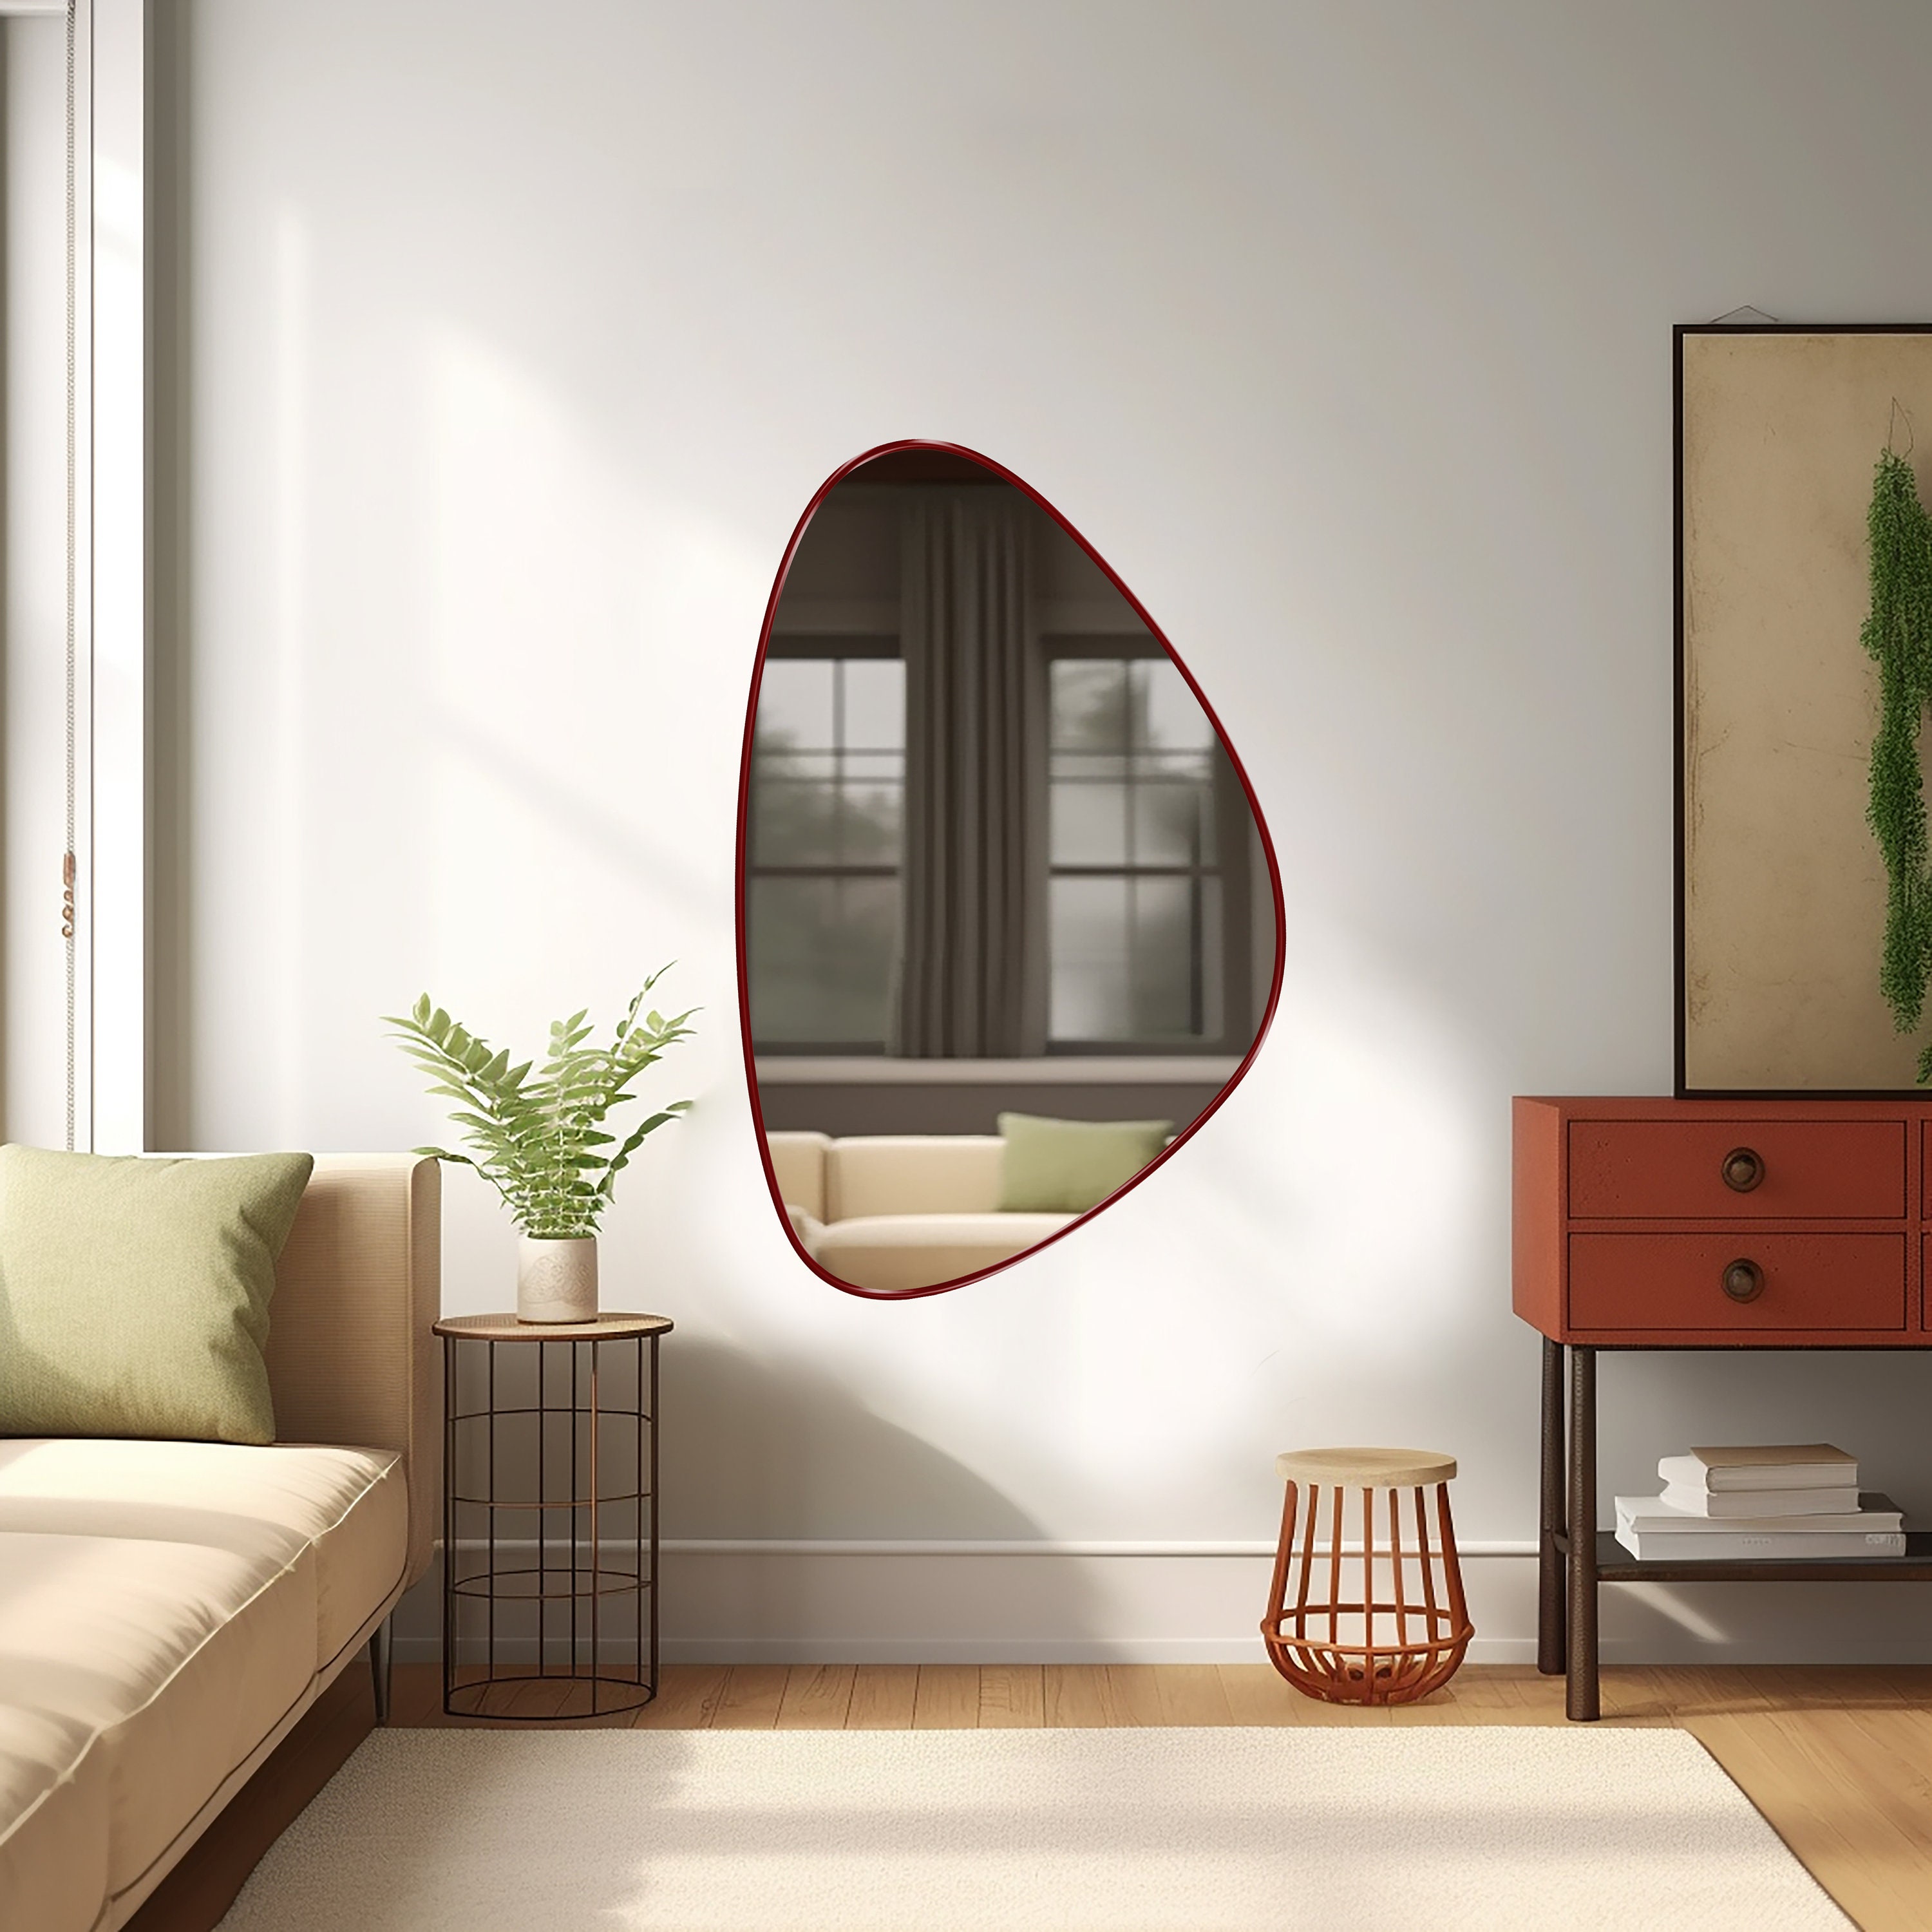 How To Decorate Your Room With An Irregular Shaped Mirror - FotoLog